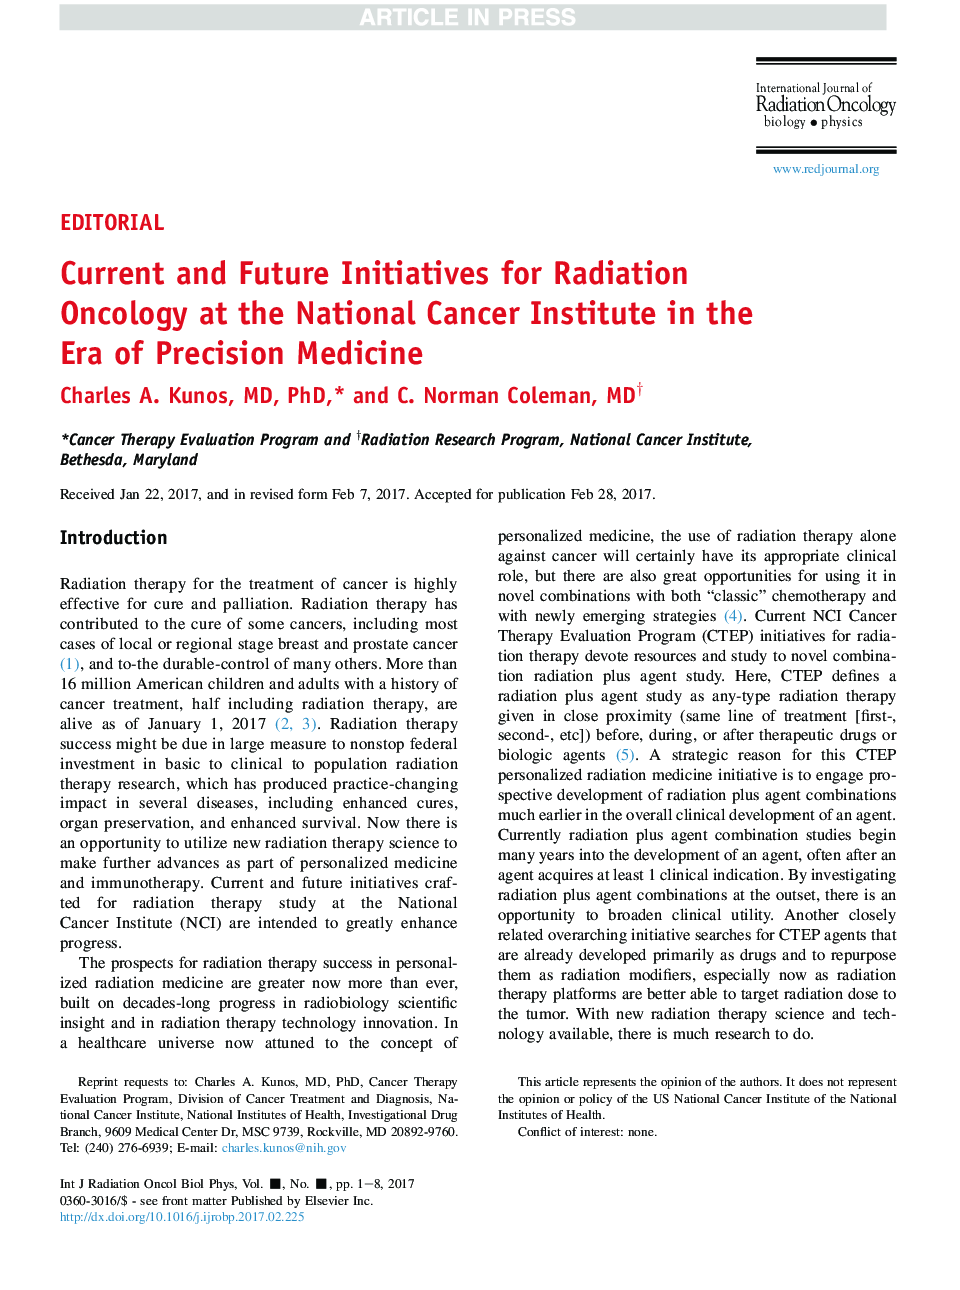 Current and Future Initiatives for Radiation Oncology at the National Cancer Institute in the Era of Precision Medicine